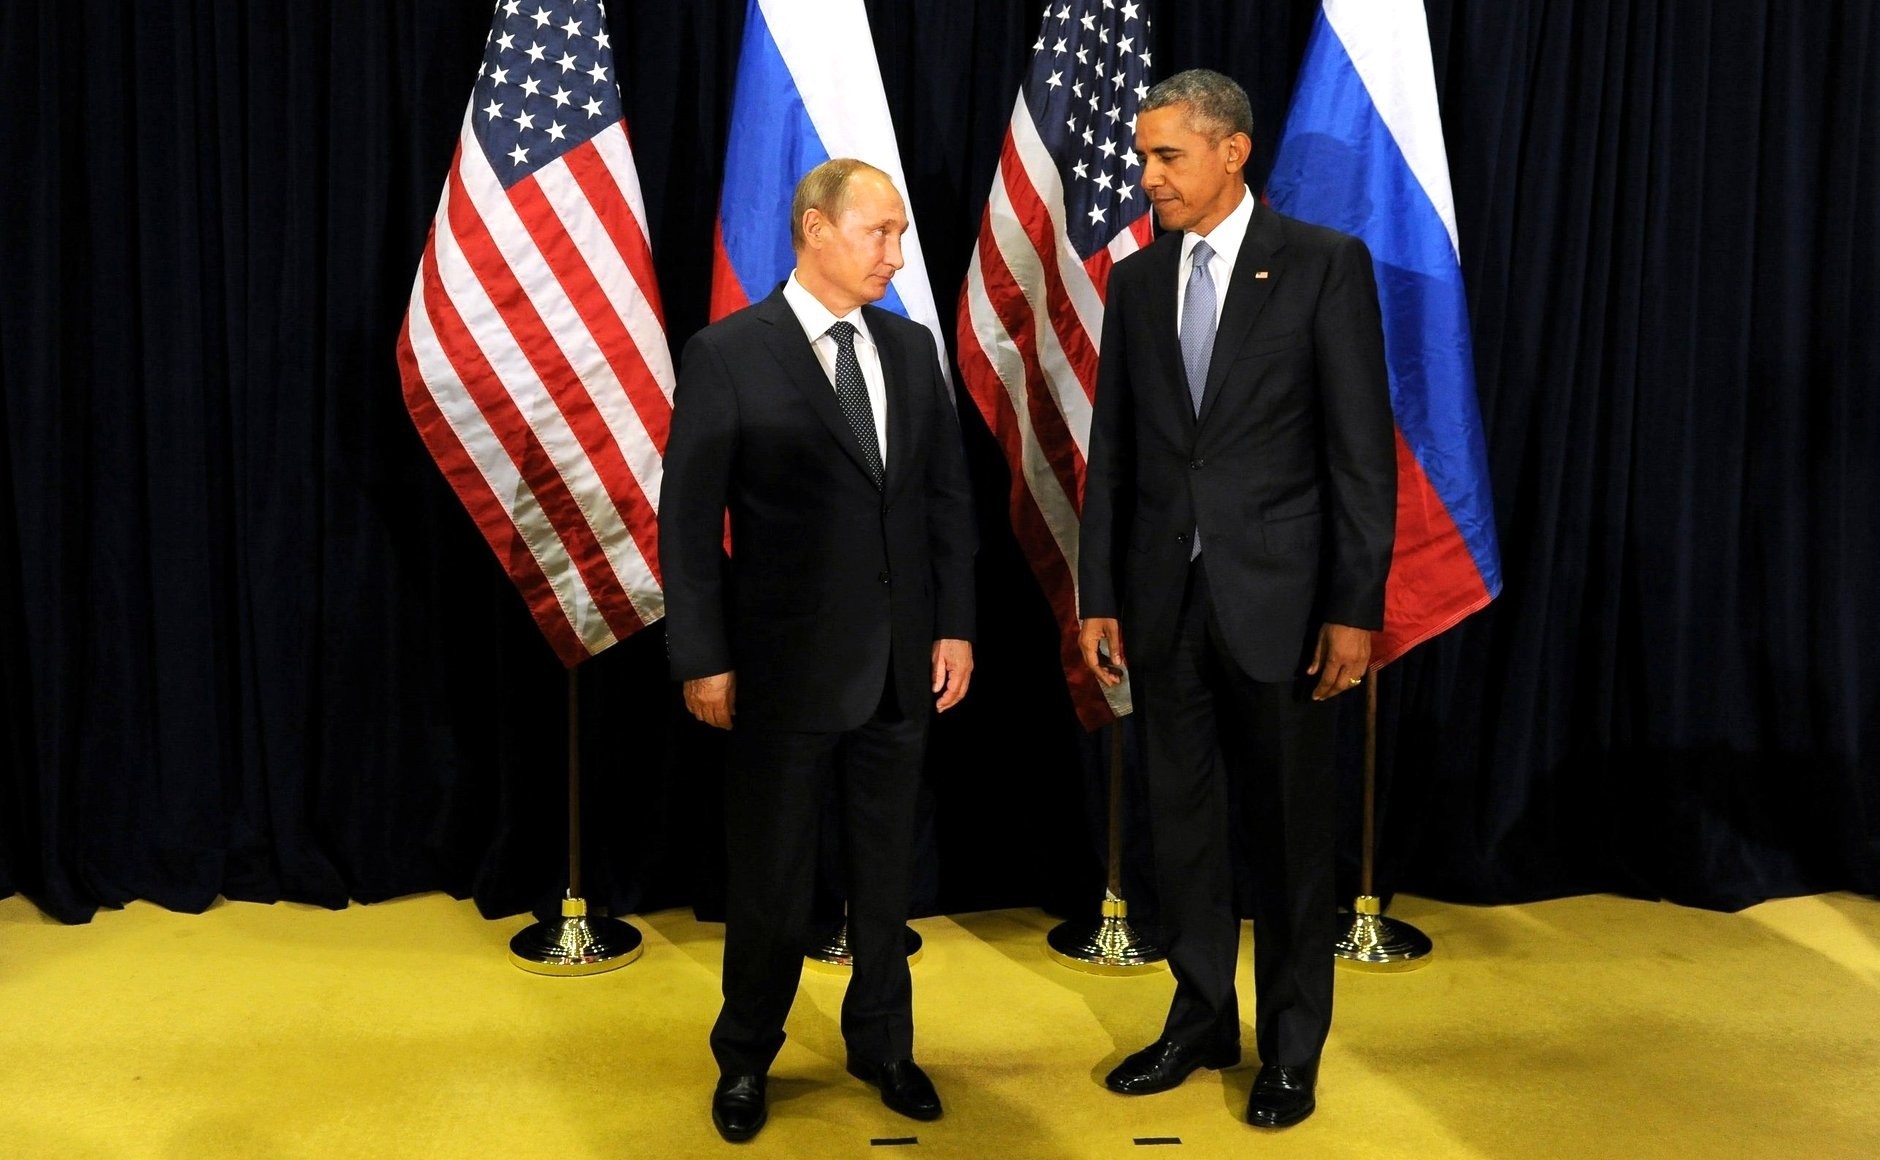 Russia's President Vladimir Putin (L) and then U.S. President Barack Obama met after the 70th session of the United Nations General Assembly in New York on Sept. 28, 2015 (Anadolu Agency—Getty Images)